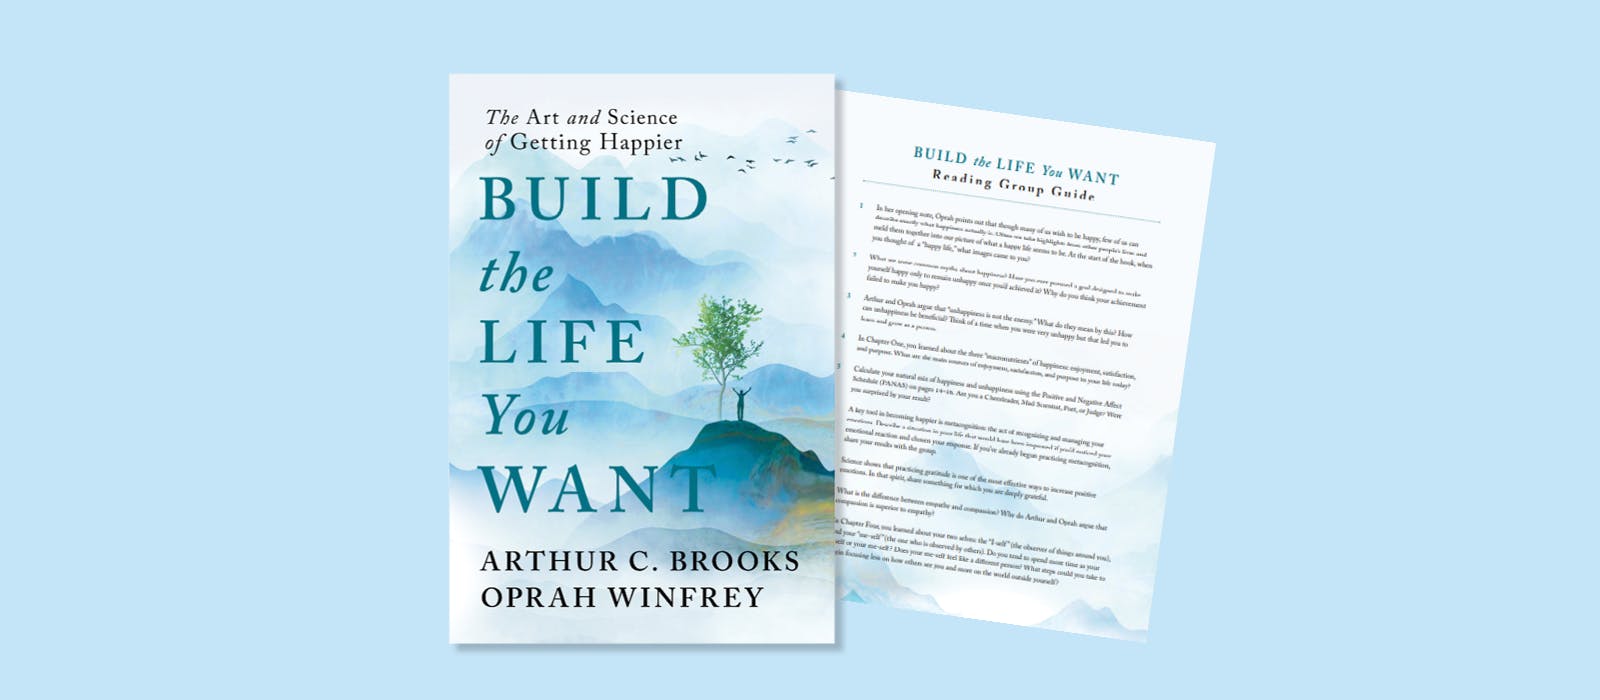 Build The Life You Want Book Club Guide - Penguin Books New Zealand